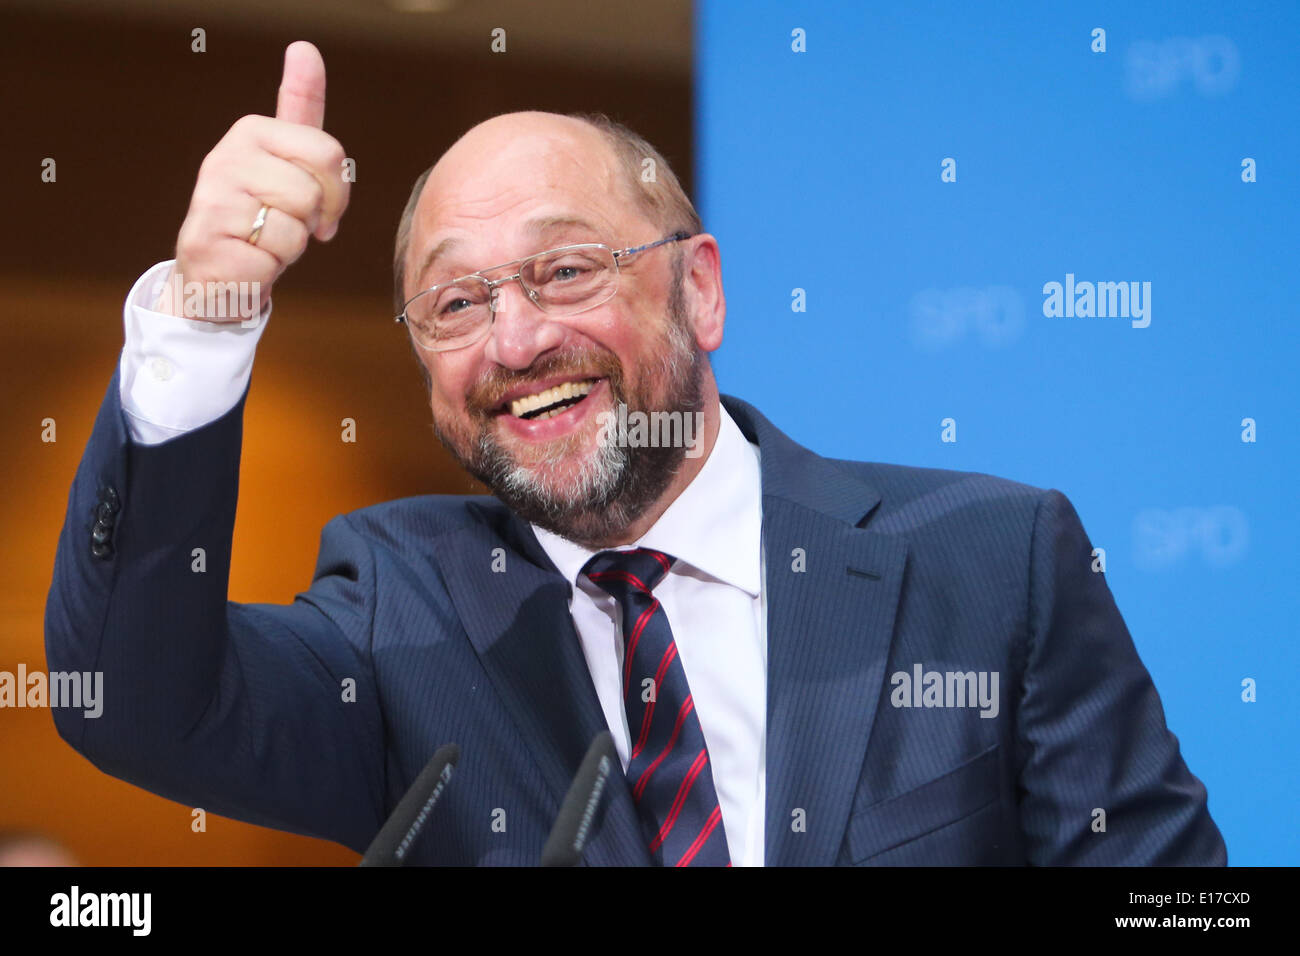 Berlin, Germany. 25th May, 2014. Incumbent President of the European Parliament (EP) and Party of European Socialists' (PES) candidate for the EP elections Martin Schulz gestures during a press conference after exit polls of Germany's EP election were announced at the German Social Democrat's (SPD) headquarters in Berlin, Germany, on May 25, 2014. Martin Schulz, top candidate of European socialists, showed confidence in his bid for the post of European Commission (EC) president after Germany's election to the EP ended on Sunday. Credit:  Xinhua/Alamy Live News Stock Photo